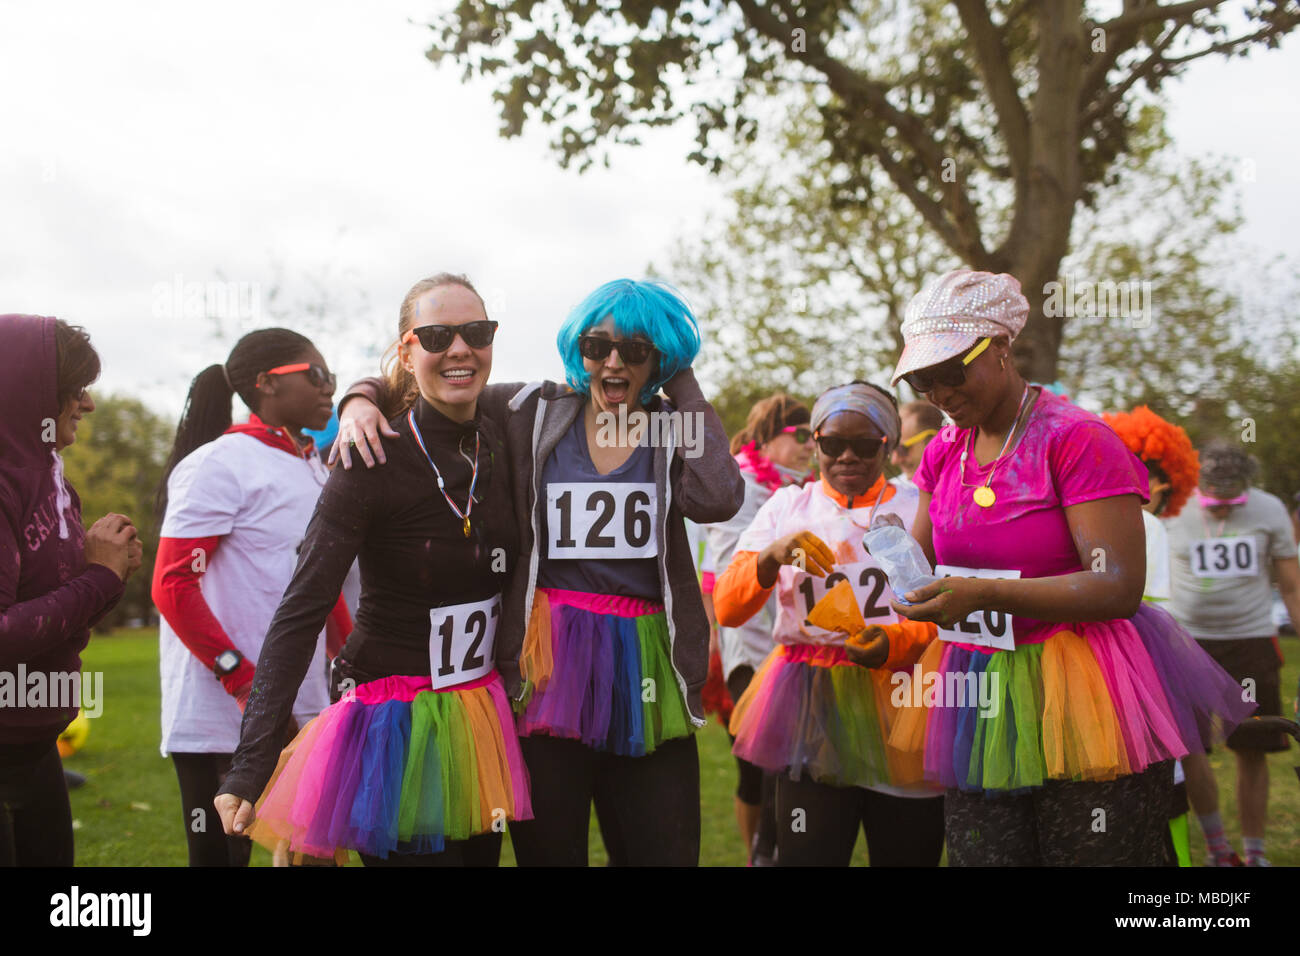 Portrait playful female runners in wigs and tutus at charity run in park Stock Photo